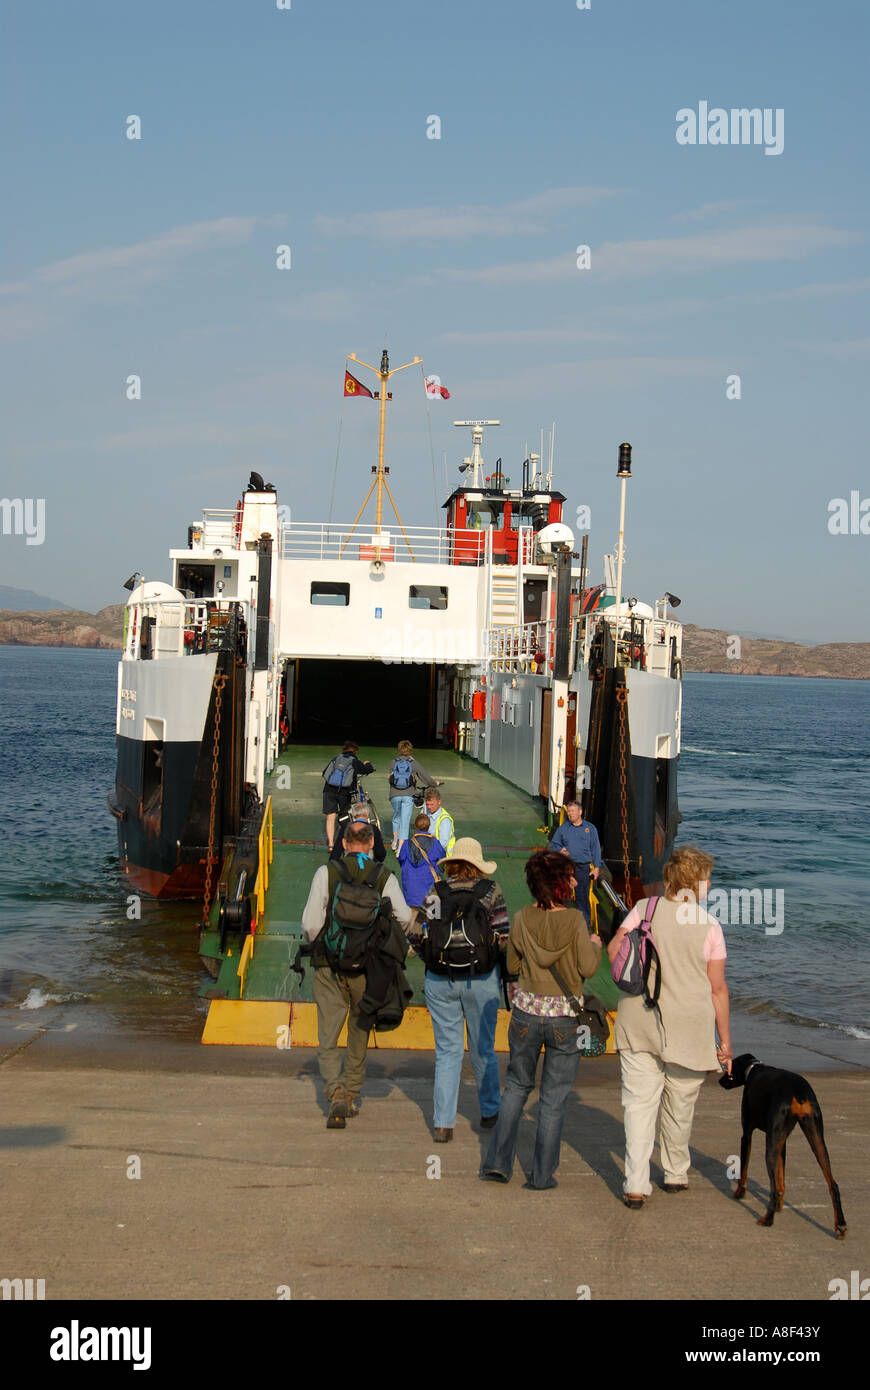 Foot passengers embarking onto a small carferry, a ten minute sea crossing to Fionnphort on the Isle of Mull from the Iona Stock Photo